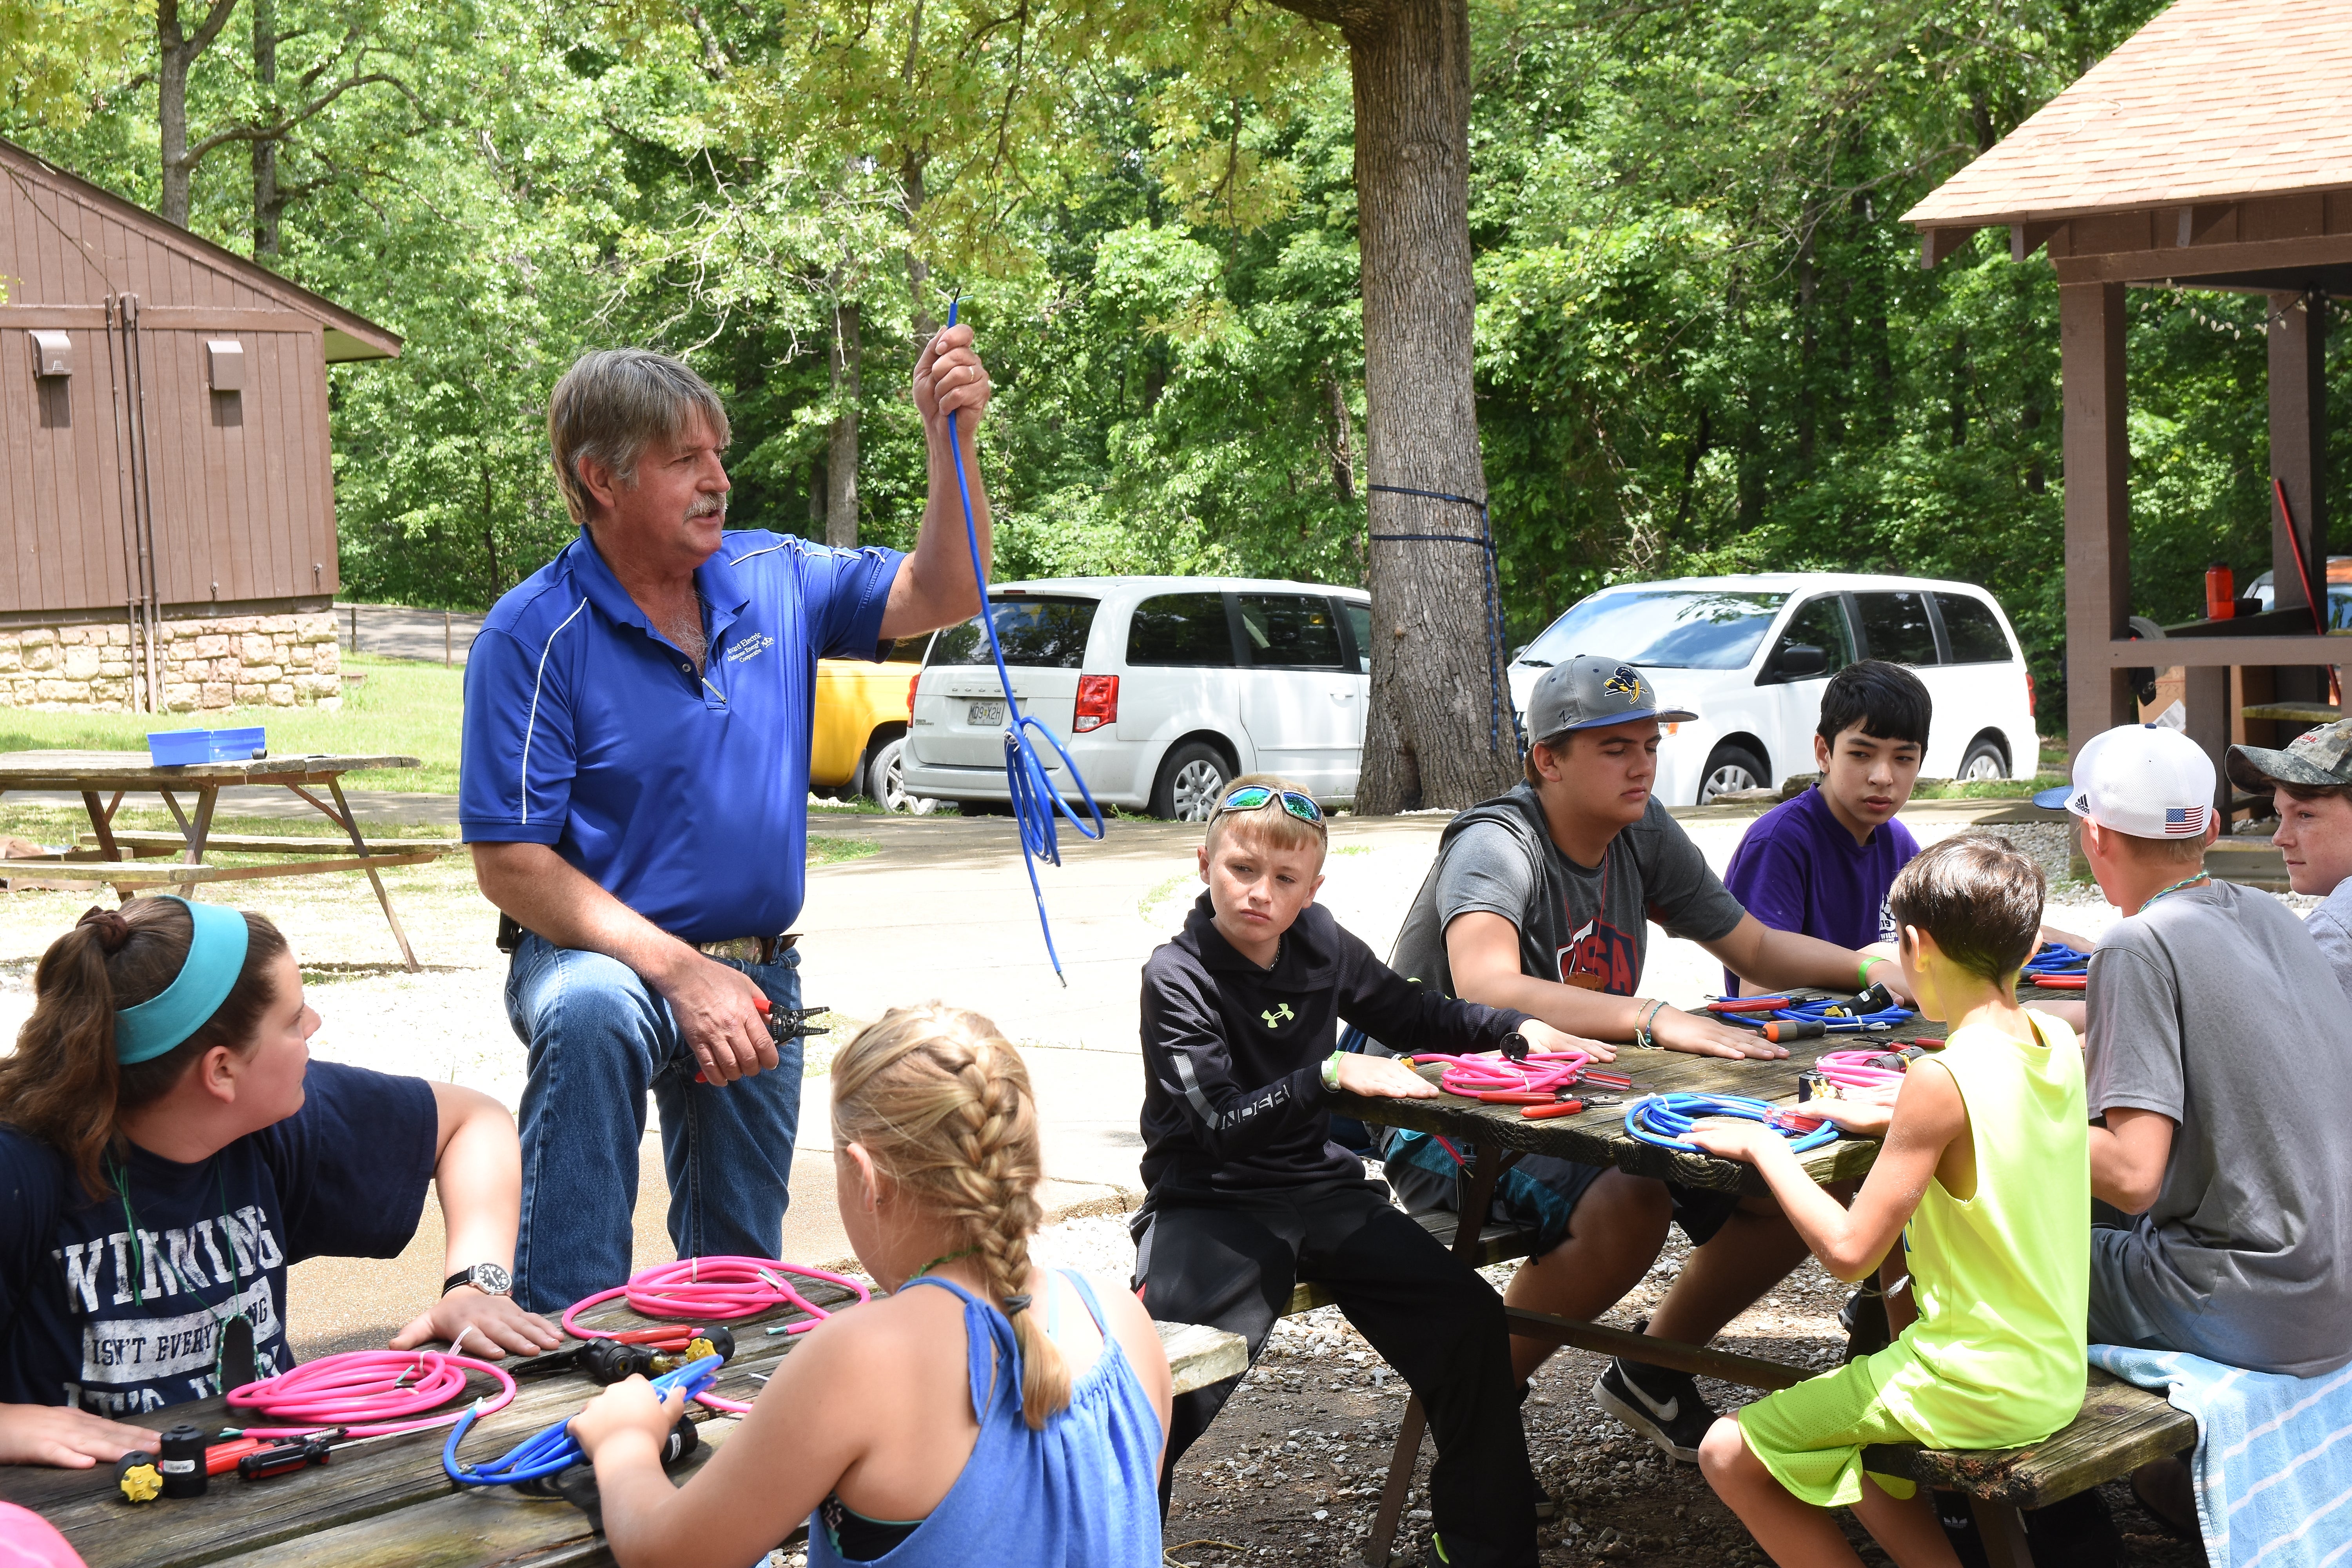 Teaching electric safety at camp